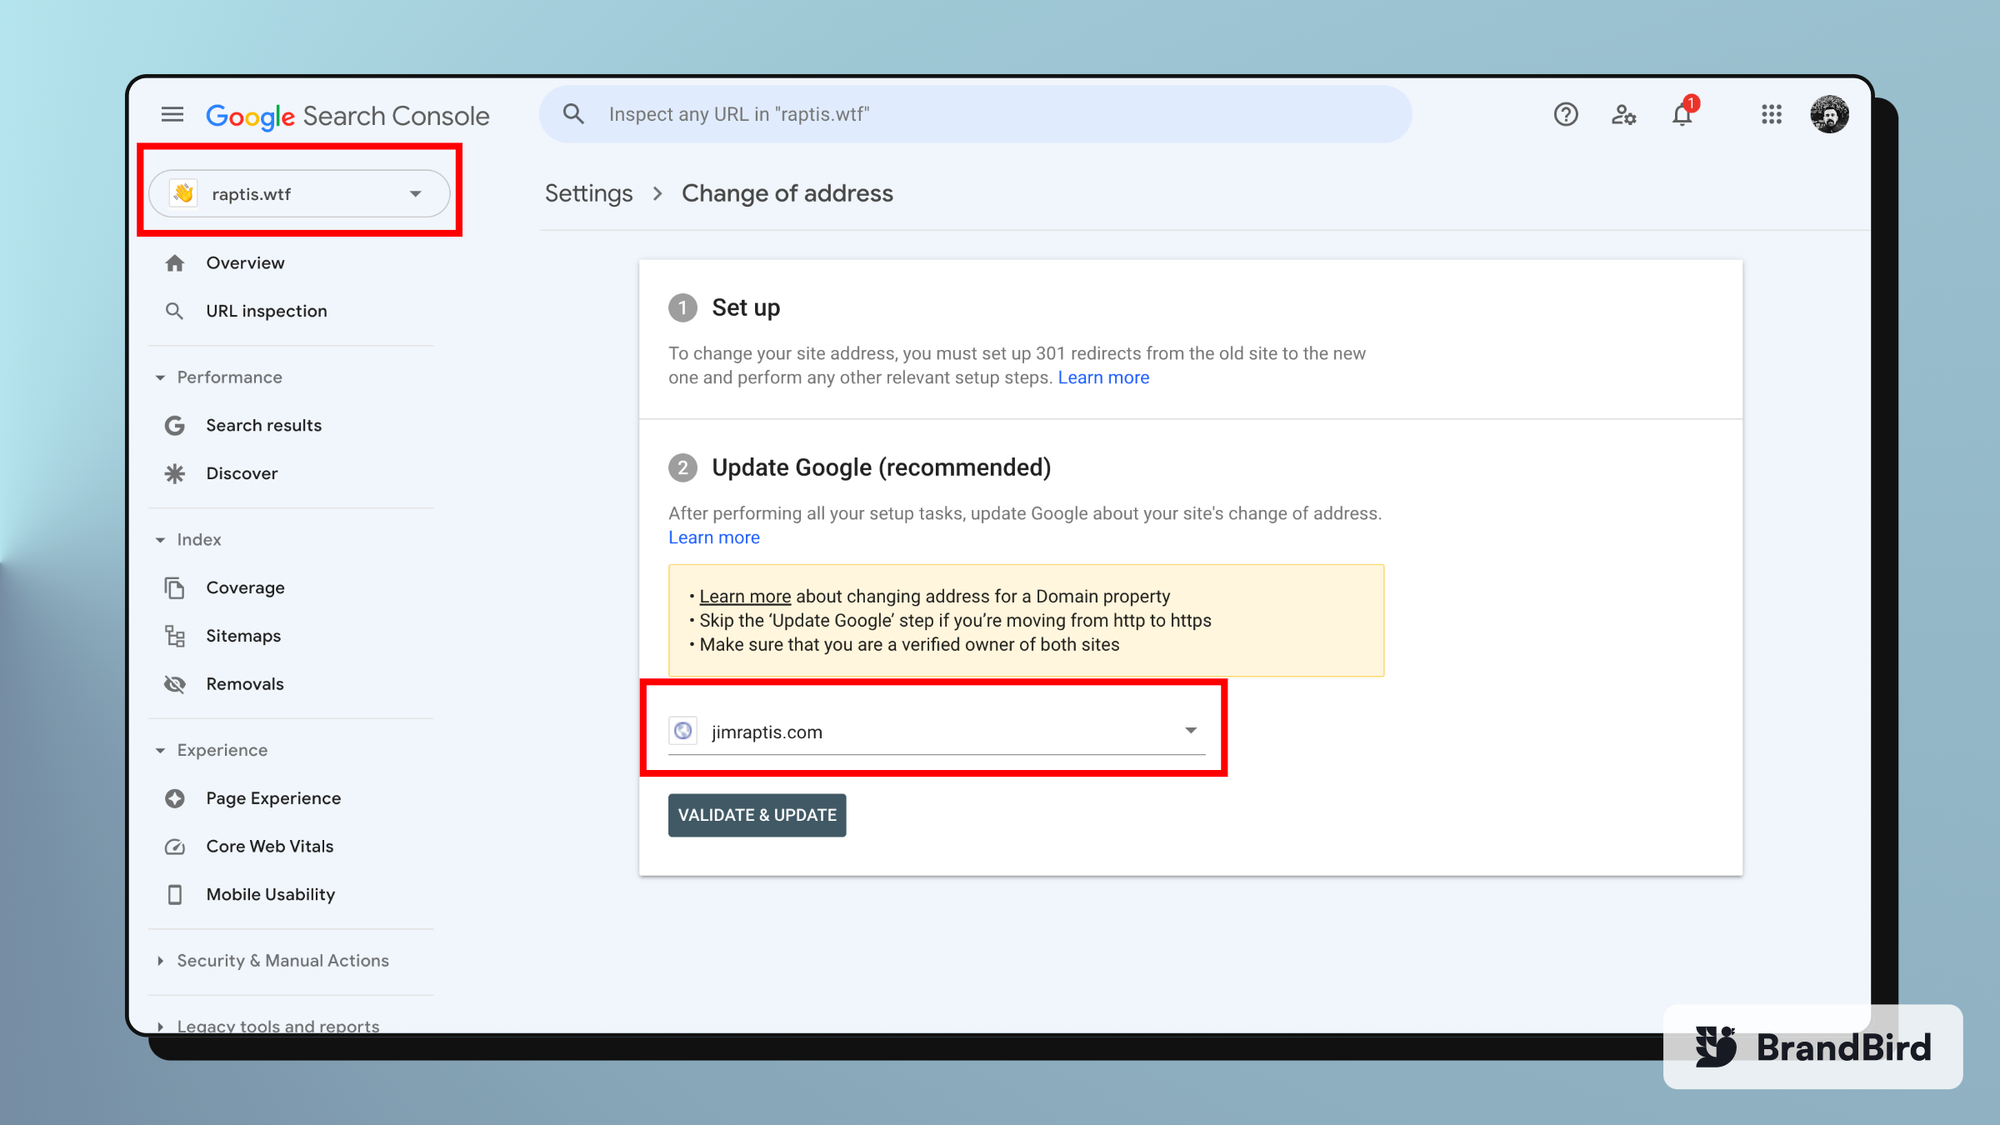 How to use the Change of Address tool of the Google Search Console